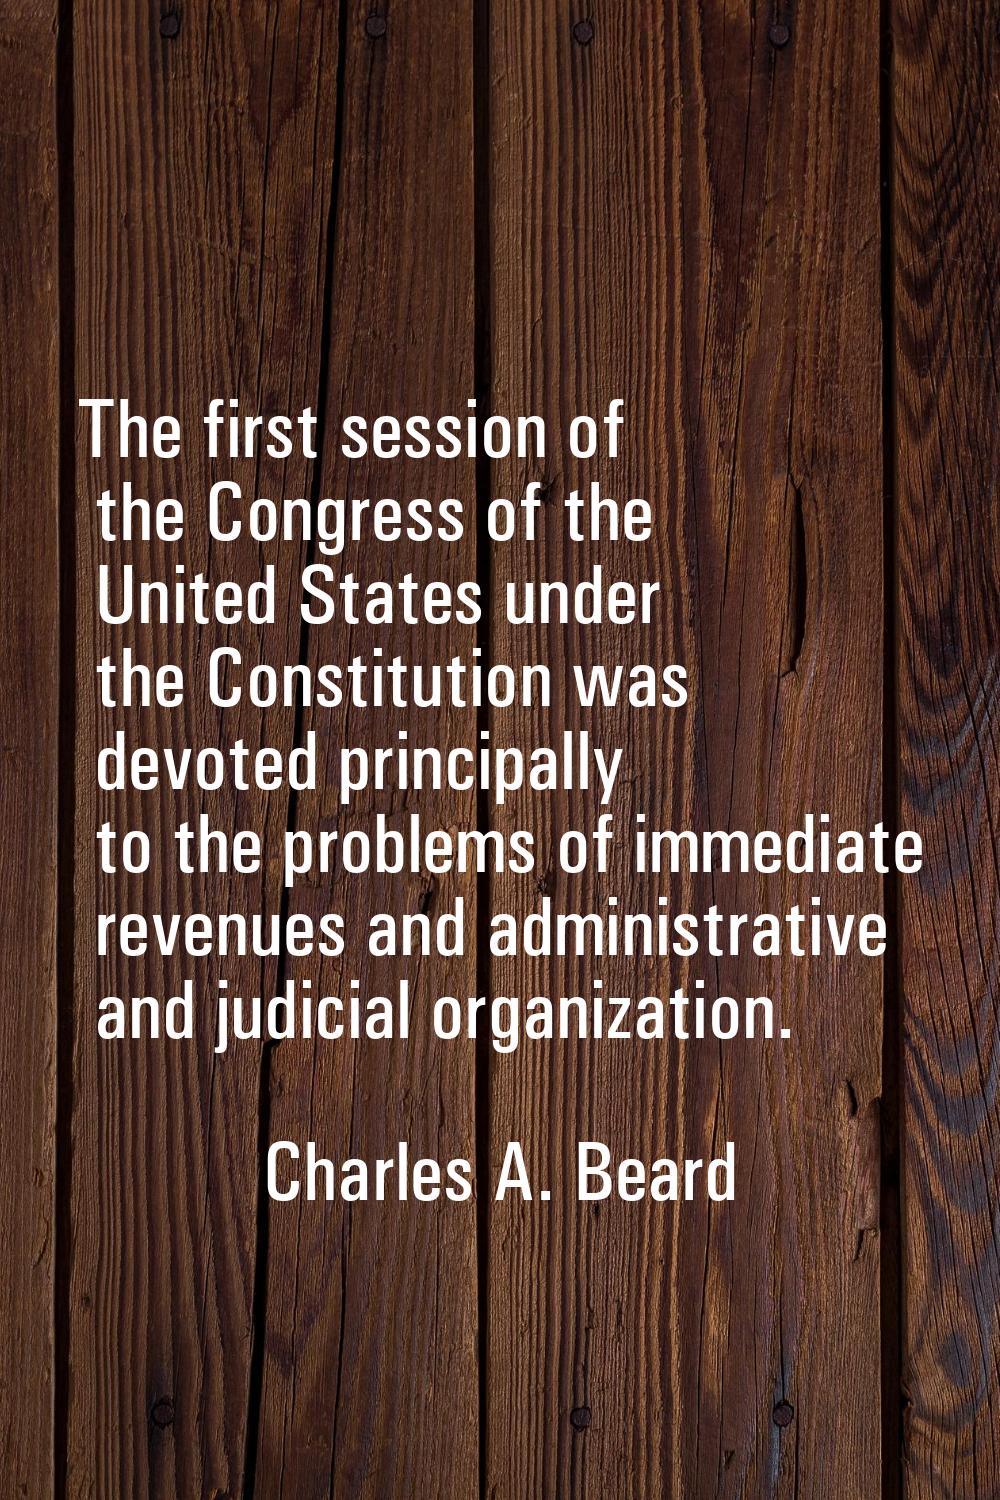 The first session of the Congress of the United States under the Constitution was devoted principal